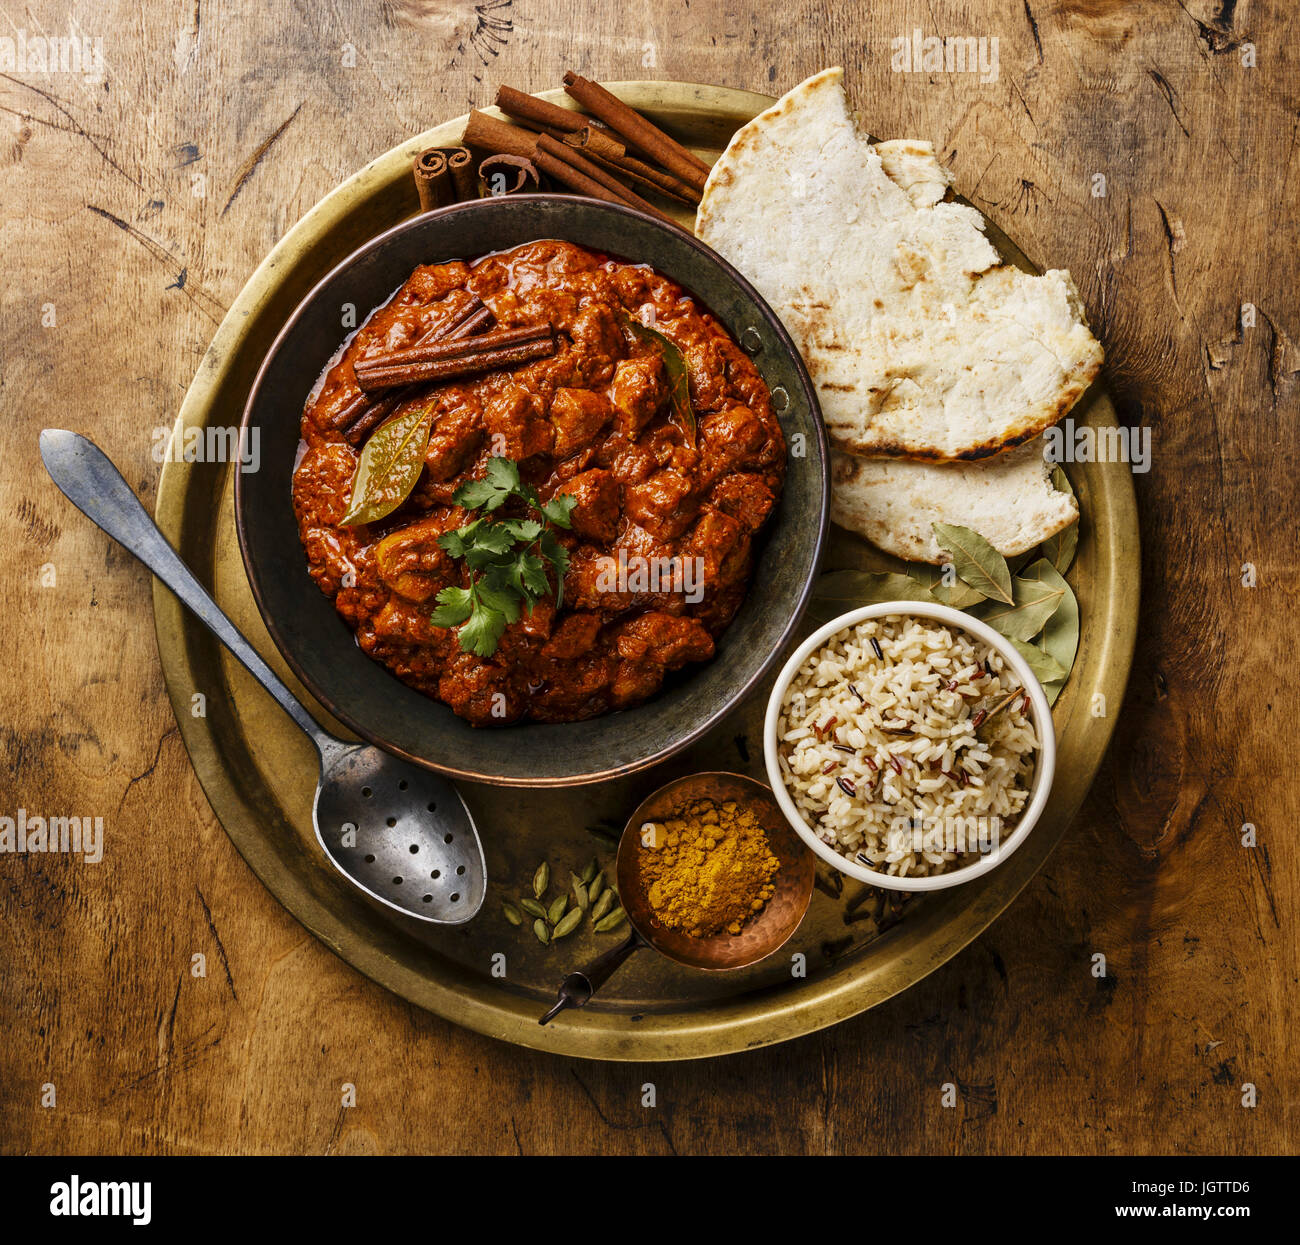 Chicken tikka masala spicy curry meat food in copper pan with rice and naan bread on wooden background Stock Photo